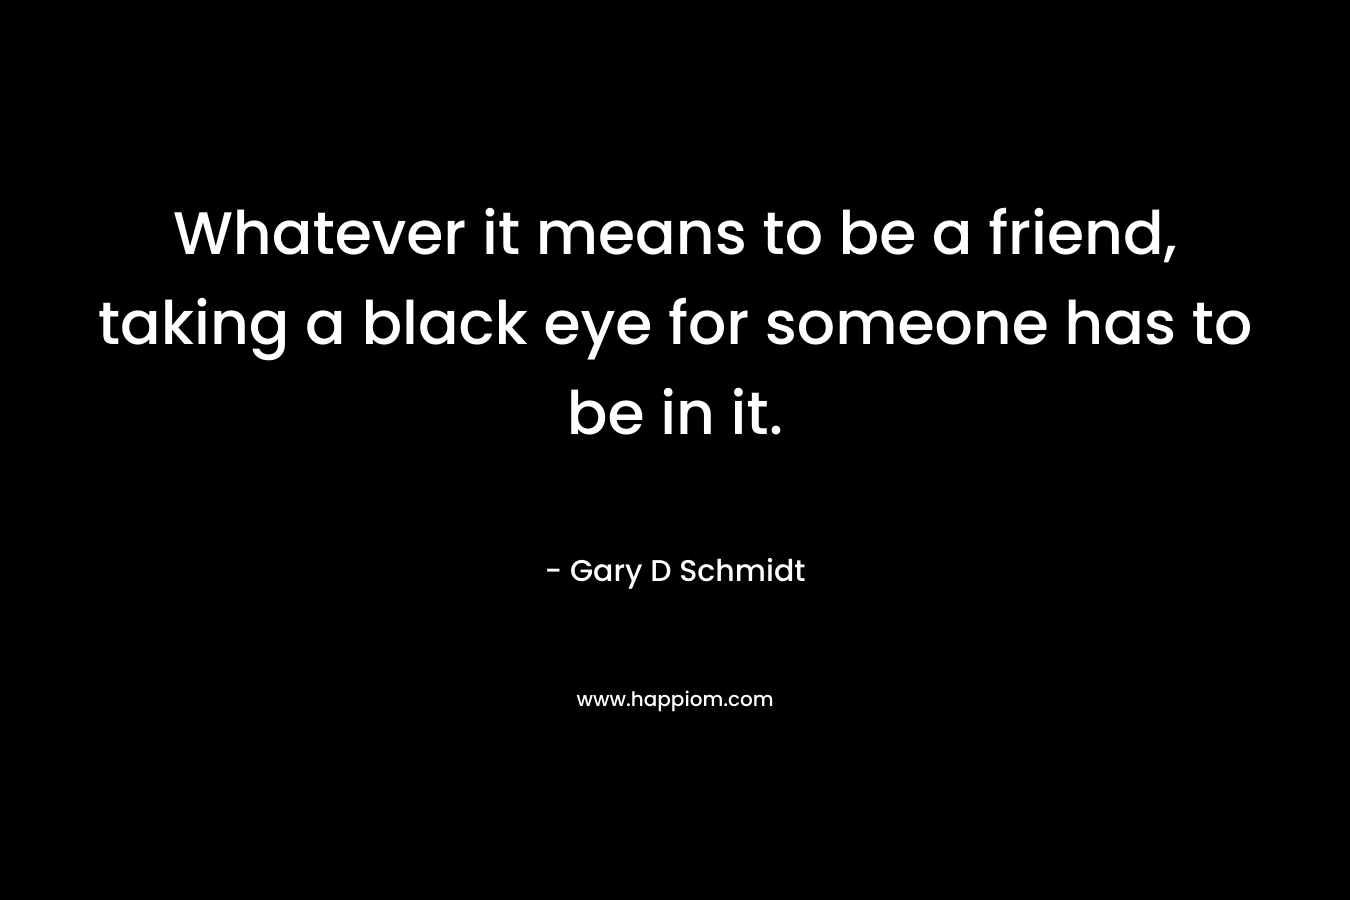 Whatever it means to be a friend, taking a black eye for someone has to be in it. – Gary D Schmidt